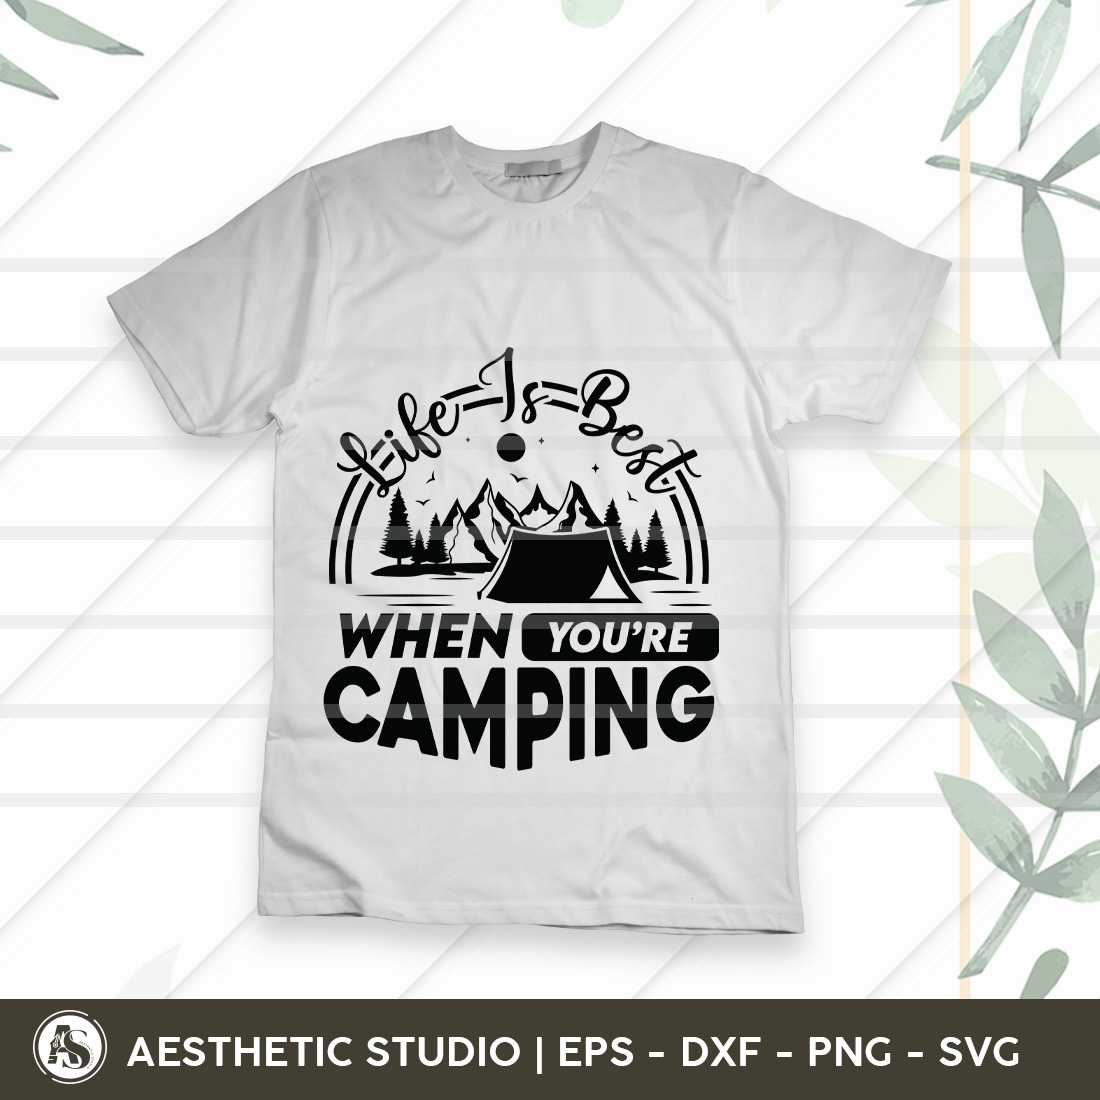 Life Is Best When You're Camping, Happy Campers, Crazy Camping Friends, Campers Have Smore Fun, Welcome To Our Camp Site, Life Is Better By The Camp Fire, SVG, Camping Quotes, Camping Bundle design, Svg, Eps, Dxf, Png, Cut file cover image.